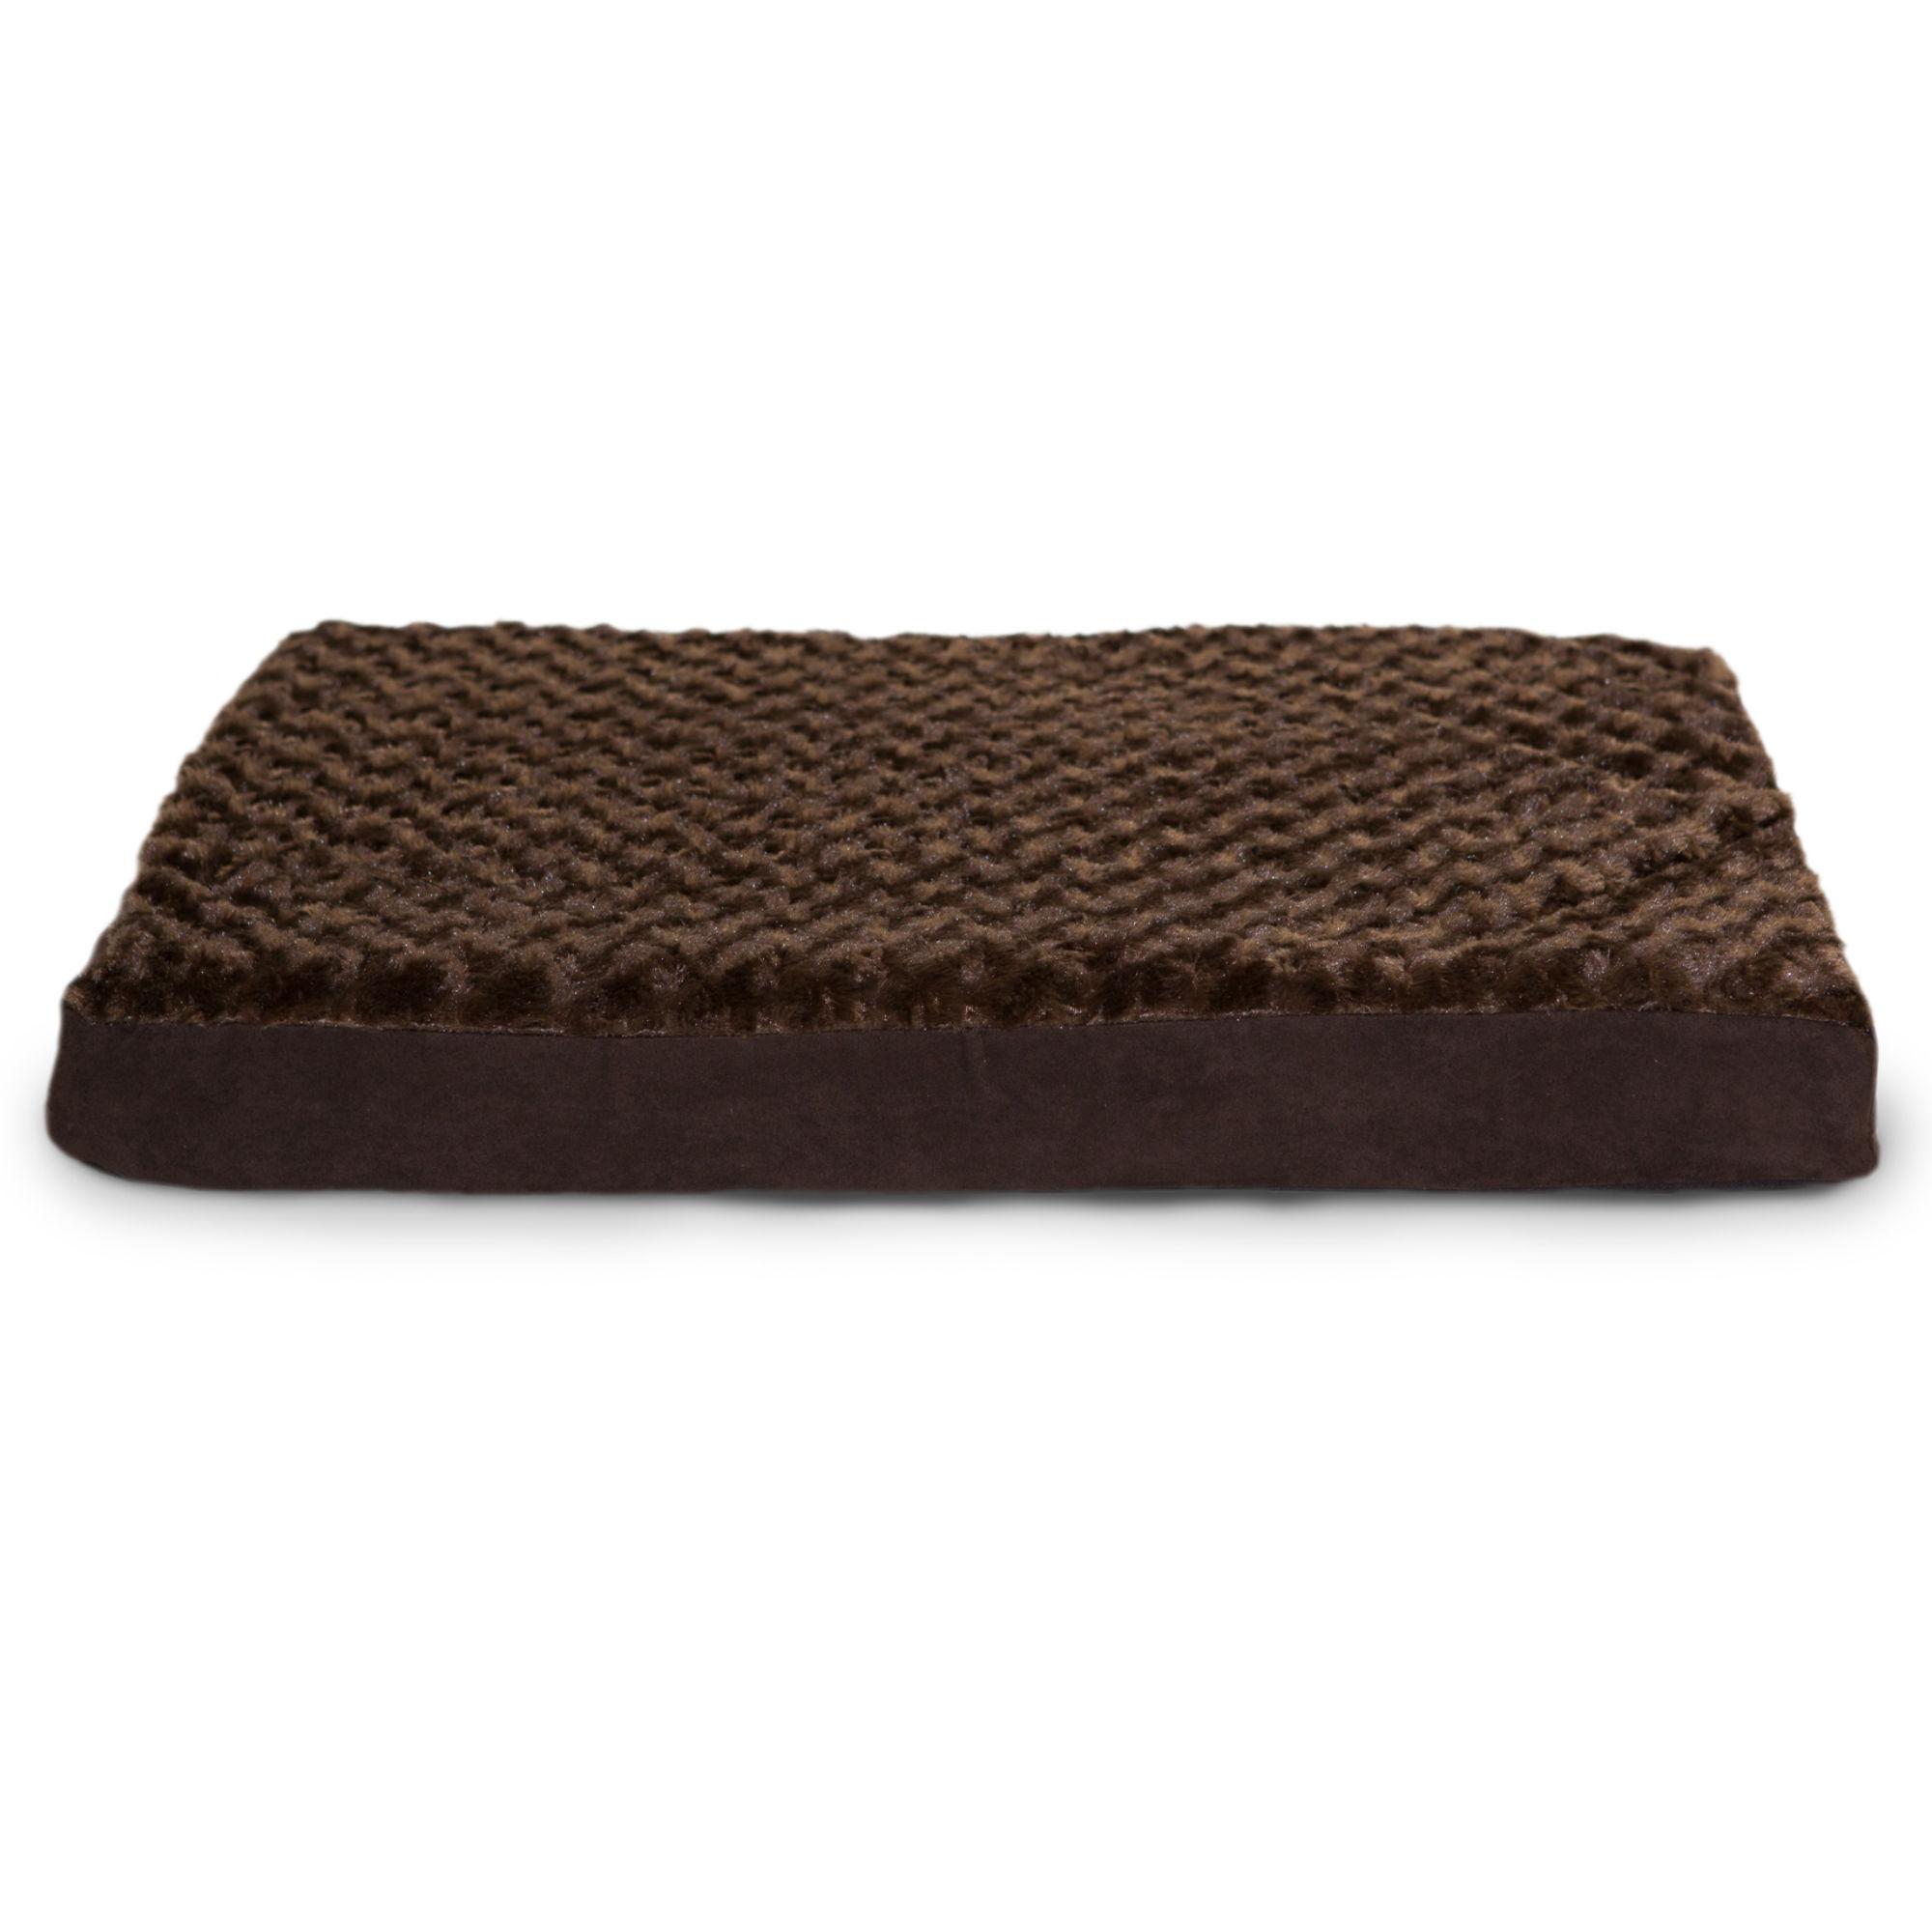 FurHaven Ultra Plush Deluxe Cooling Gel Top Pet Bed - Chocolate